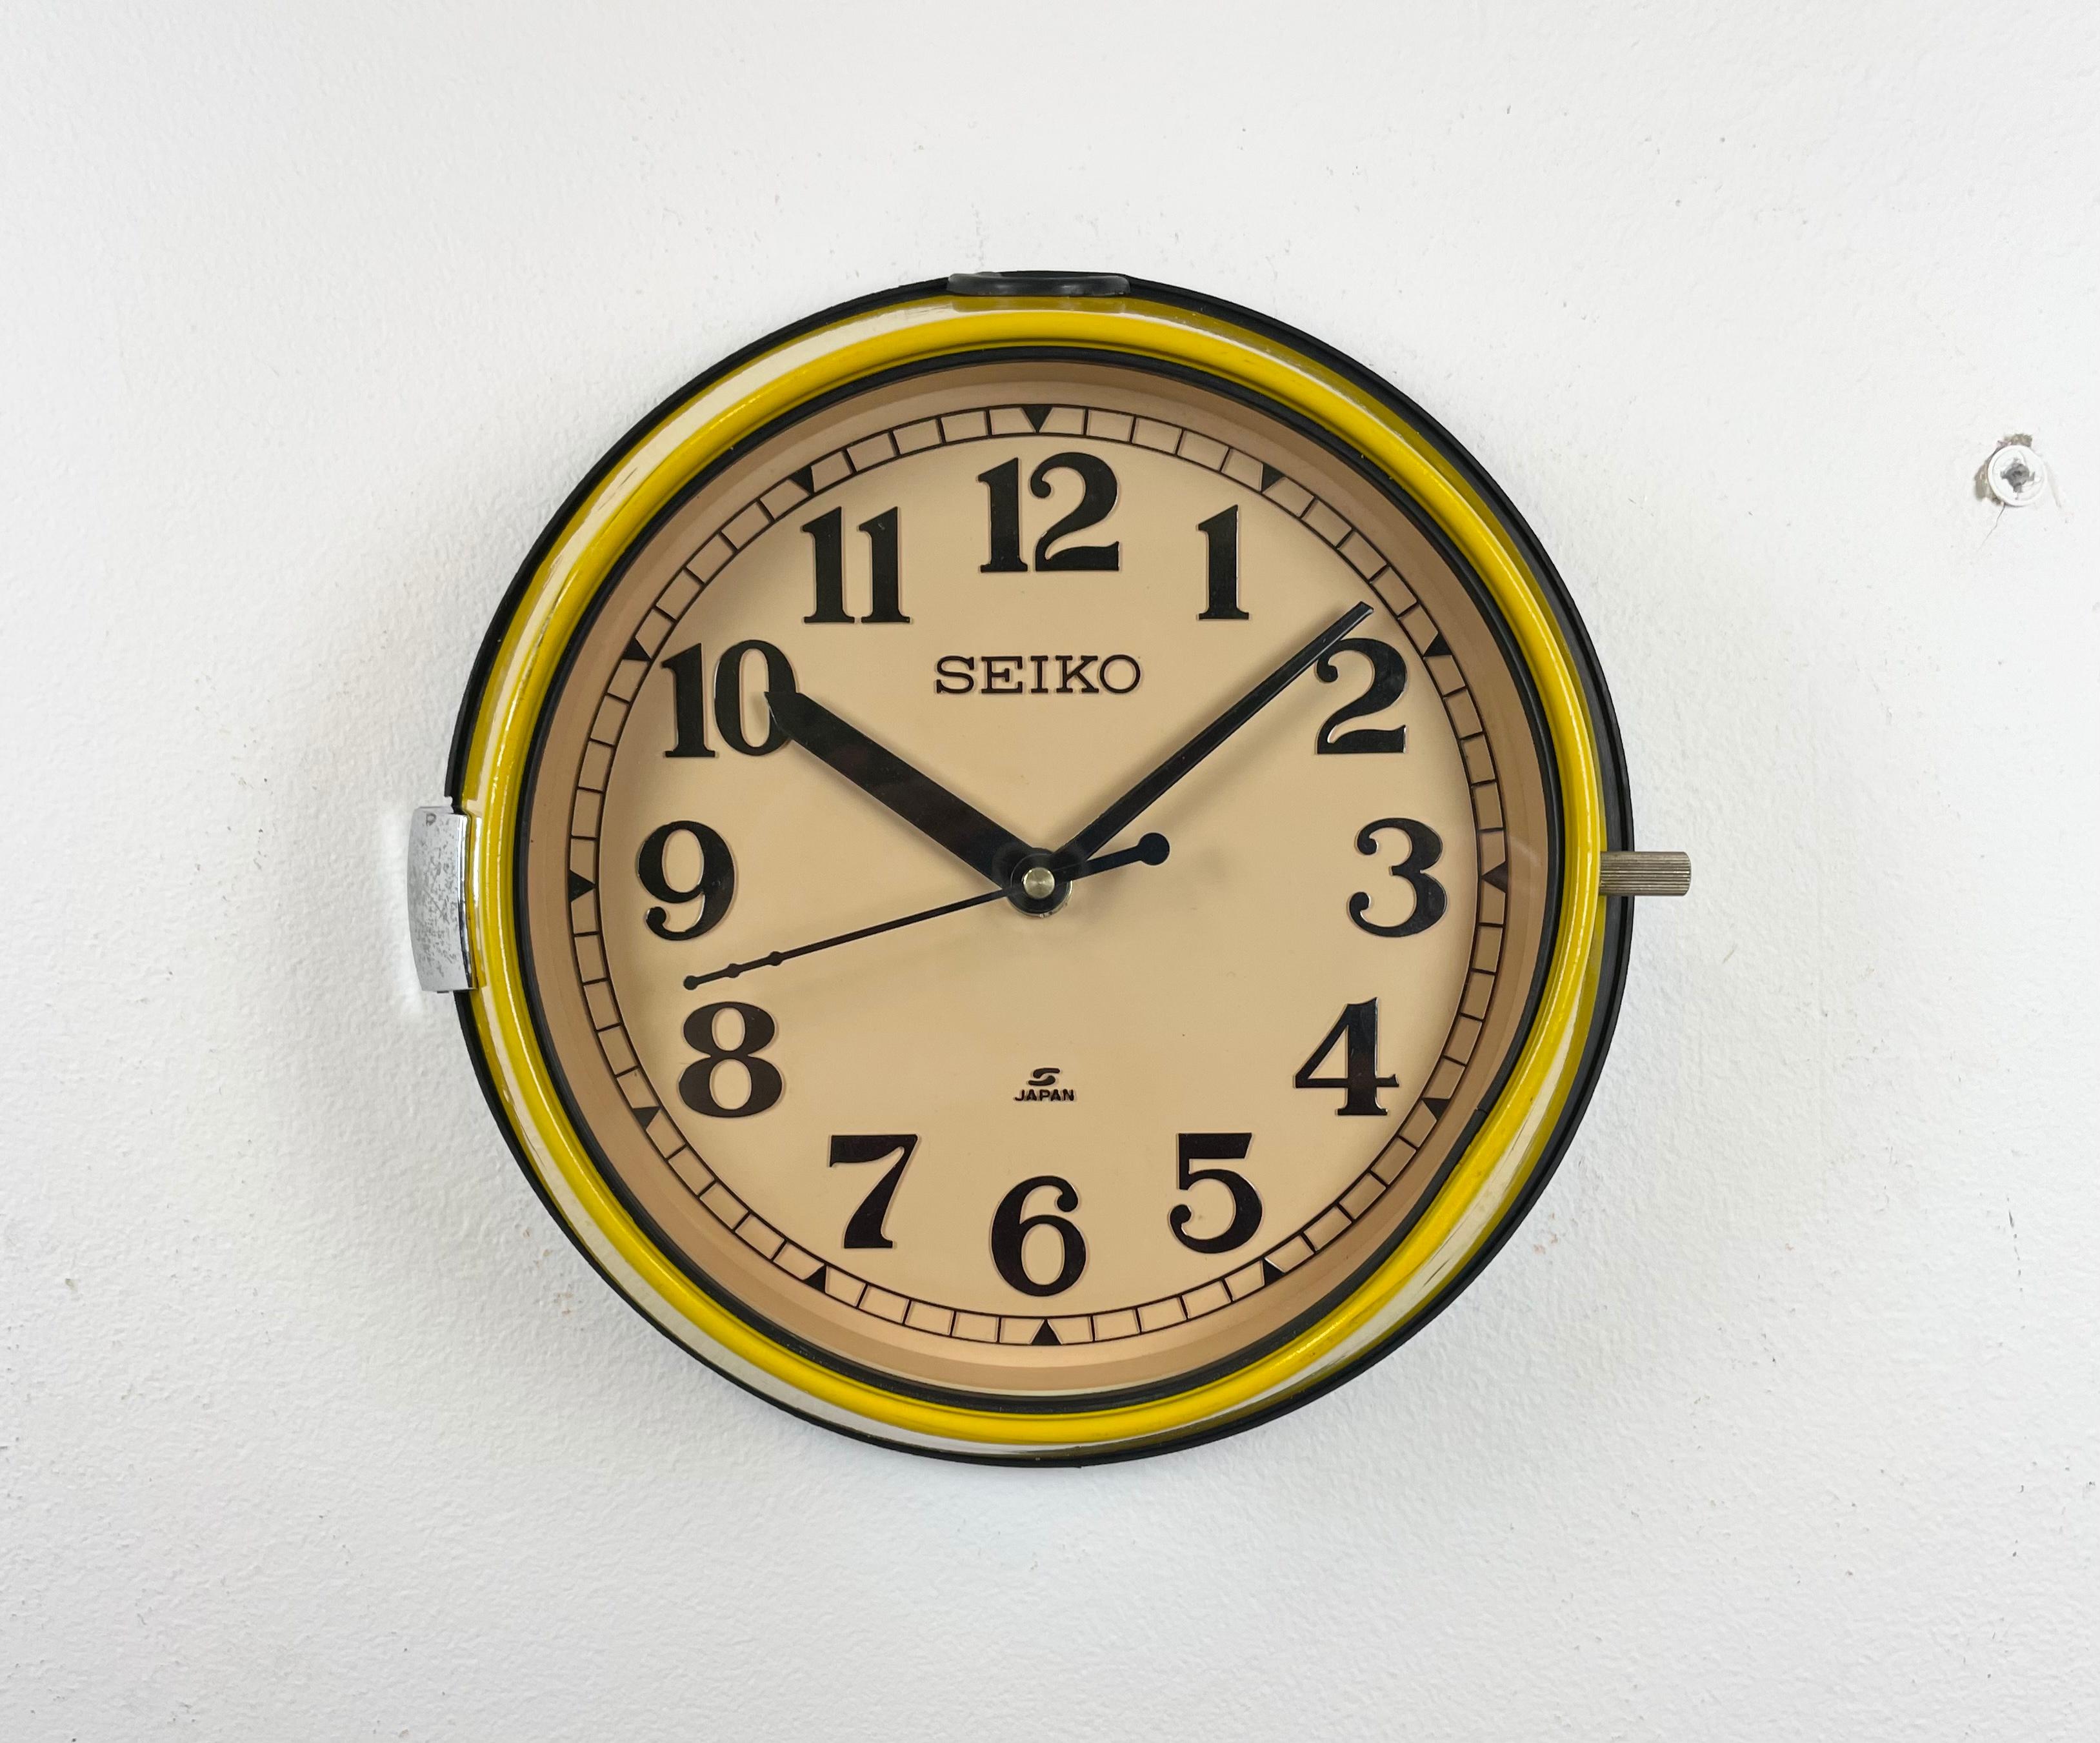 Vintage Seiko navy slave clock designed during the 1970s and produced till 1990s. These clocks were used on large Japanese tankers and cargo ships. It features a yellow metal frame, a plastic dial and clear glass cover. This item has been converted